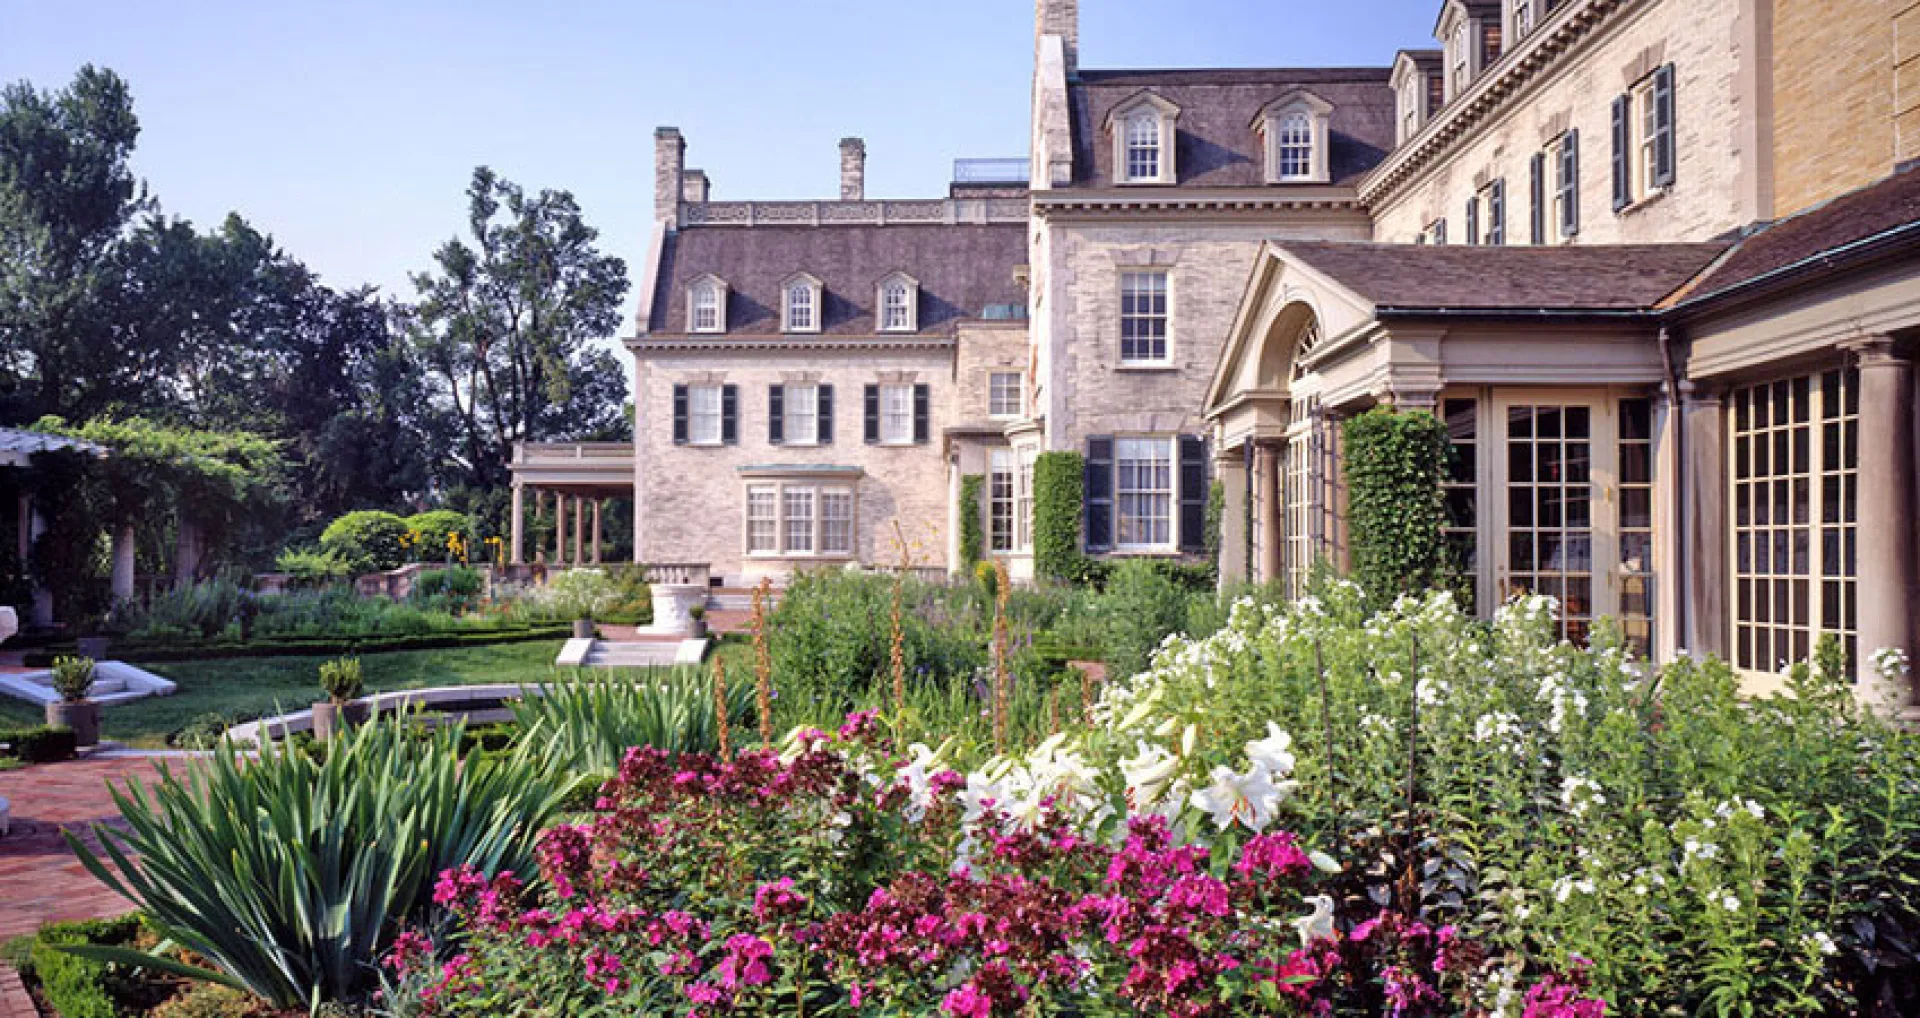 View of the mansion from the Townson Terrace garden